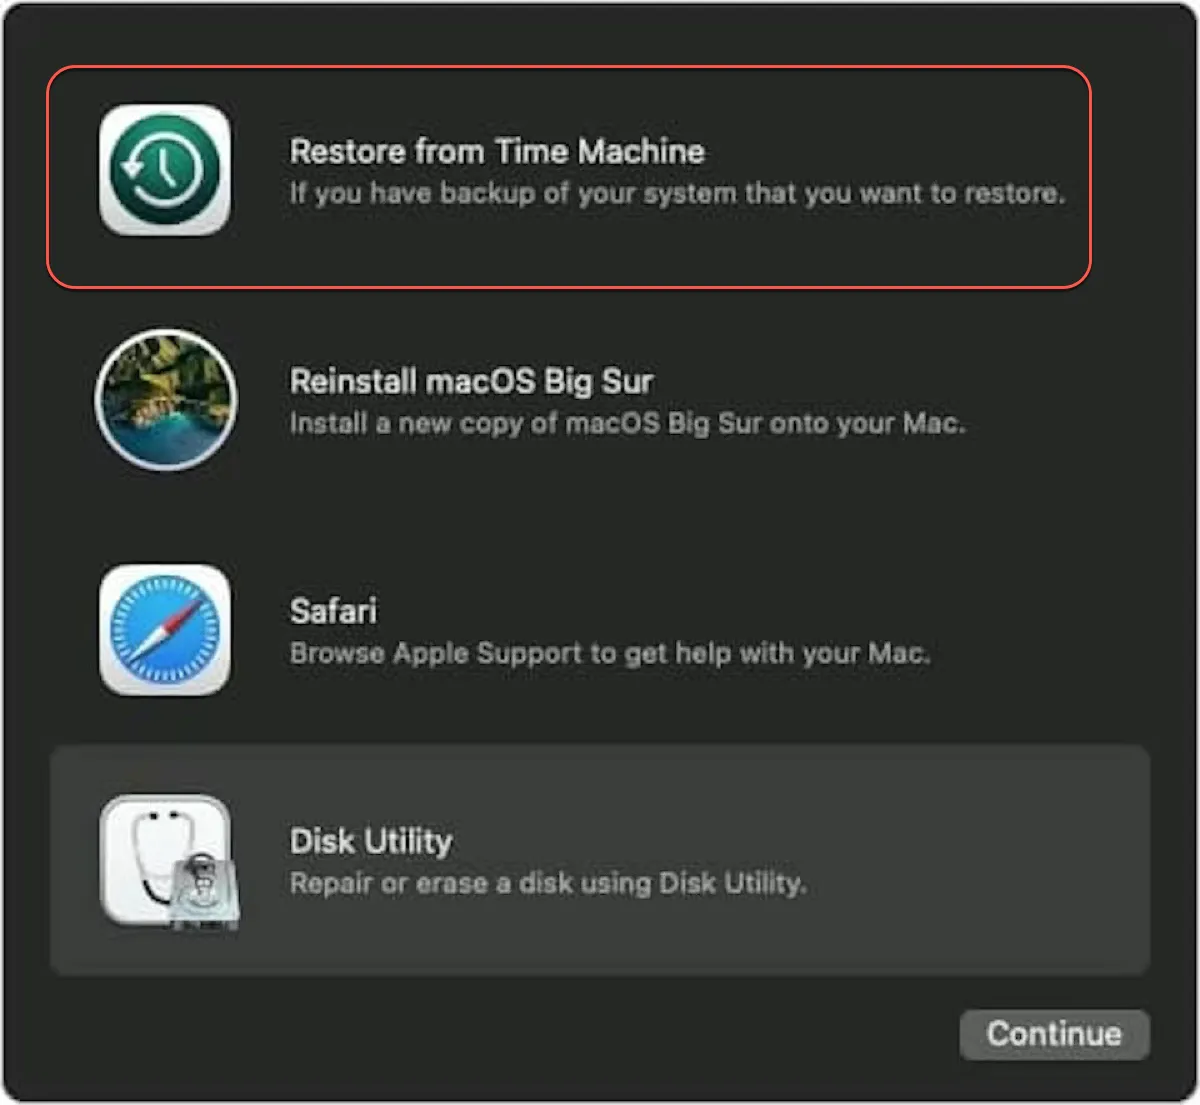 Restore to a previous version from Time Machine backups